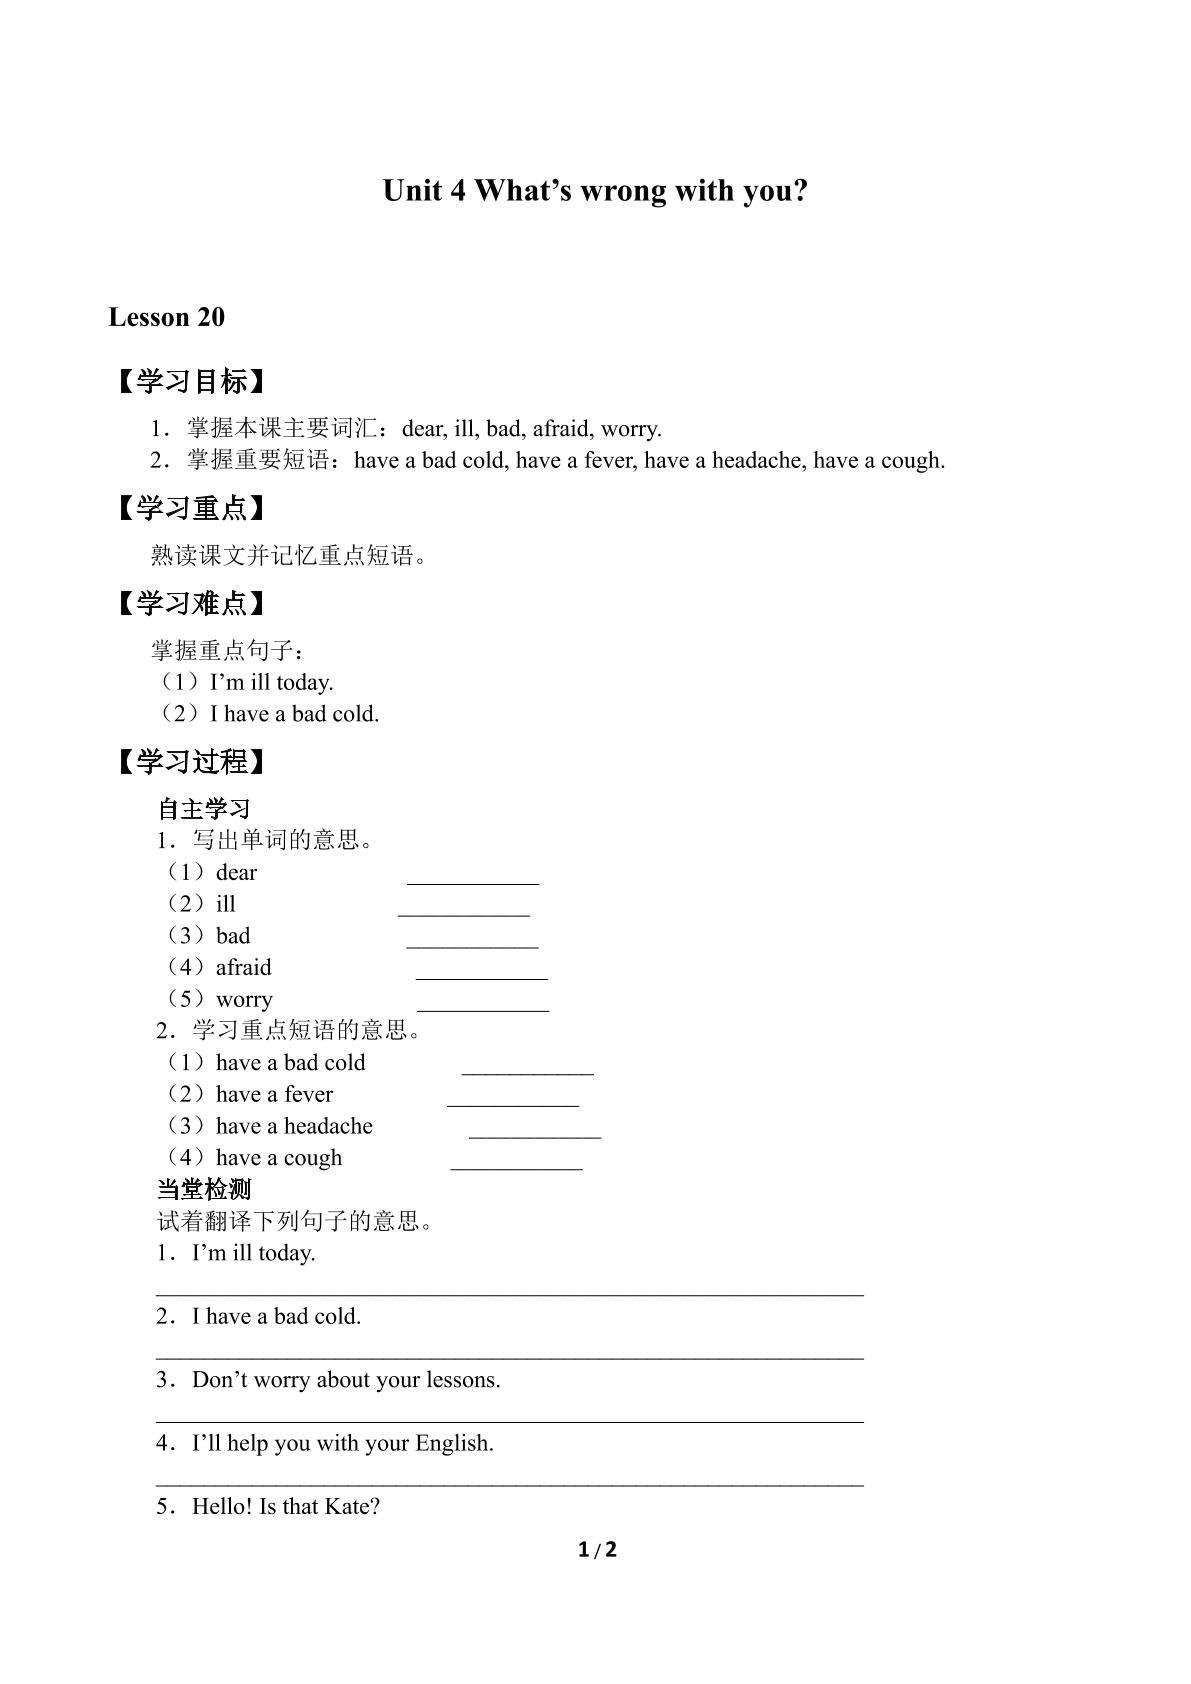 Unit 4 What's wrong with you?_学案2